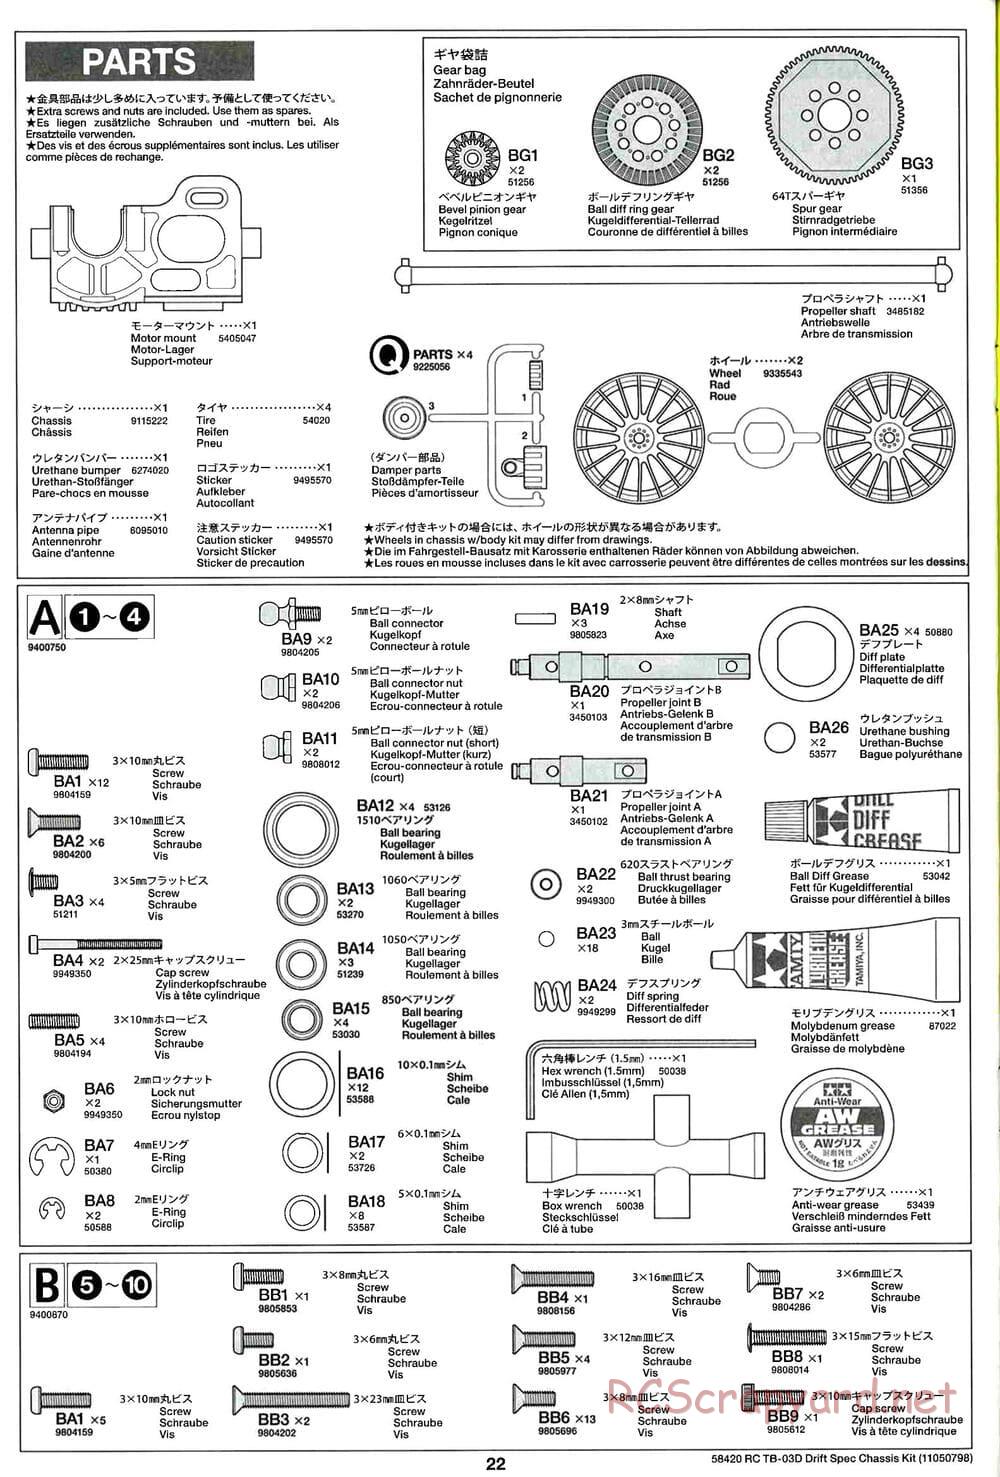 Tamiya - TB-03D HP Drift Spec Chassis - Manual - Page 22